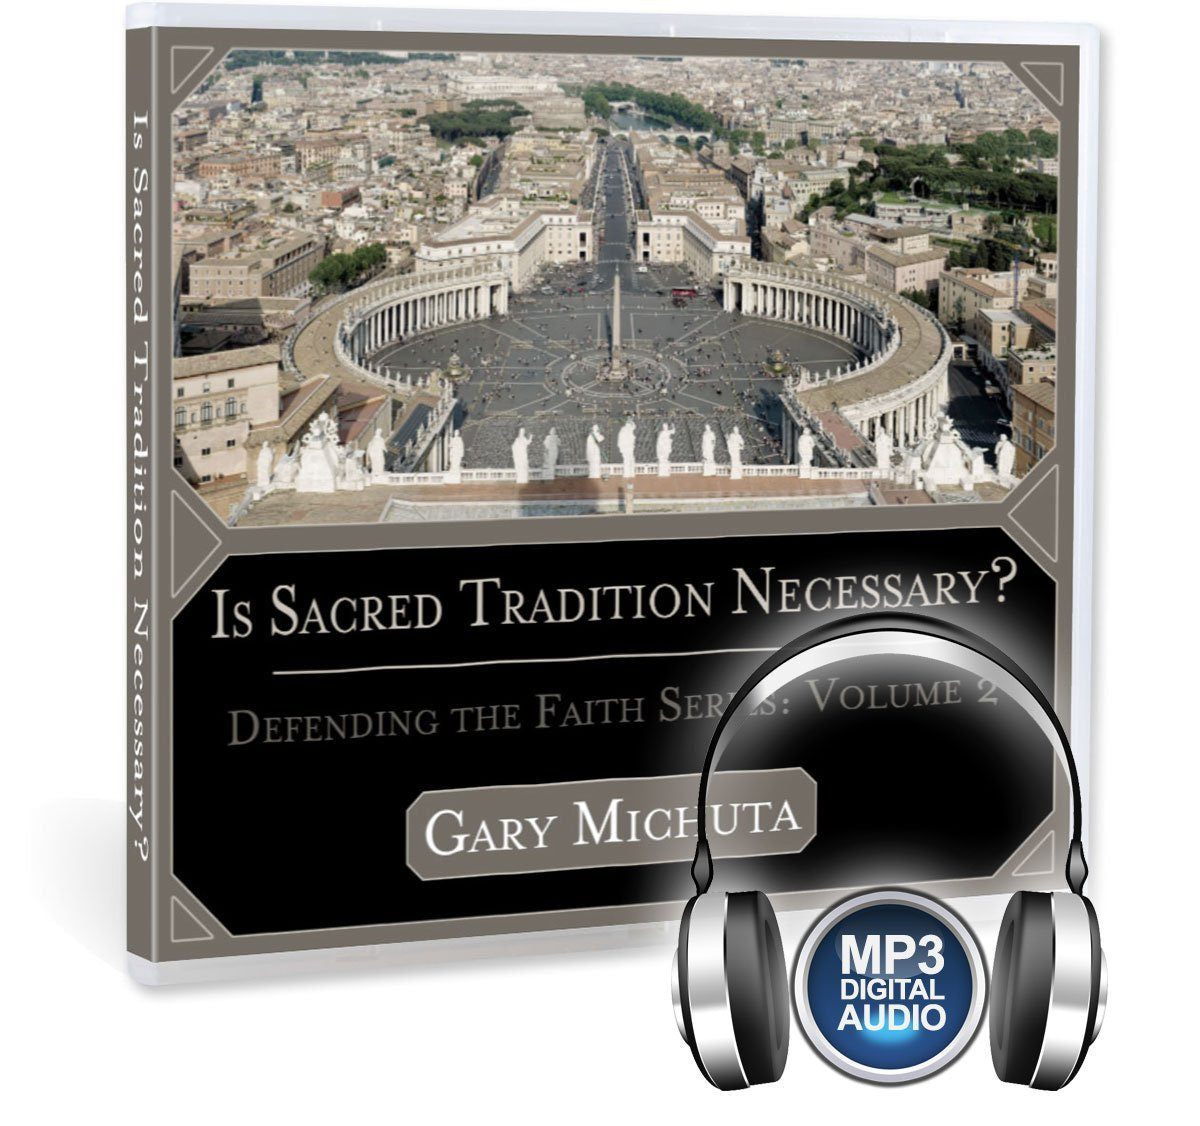 Gary Michuta discusses what sacred tradition is and whether or not the Bible alone is all Christians need as a guide for their faith CD